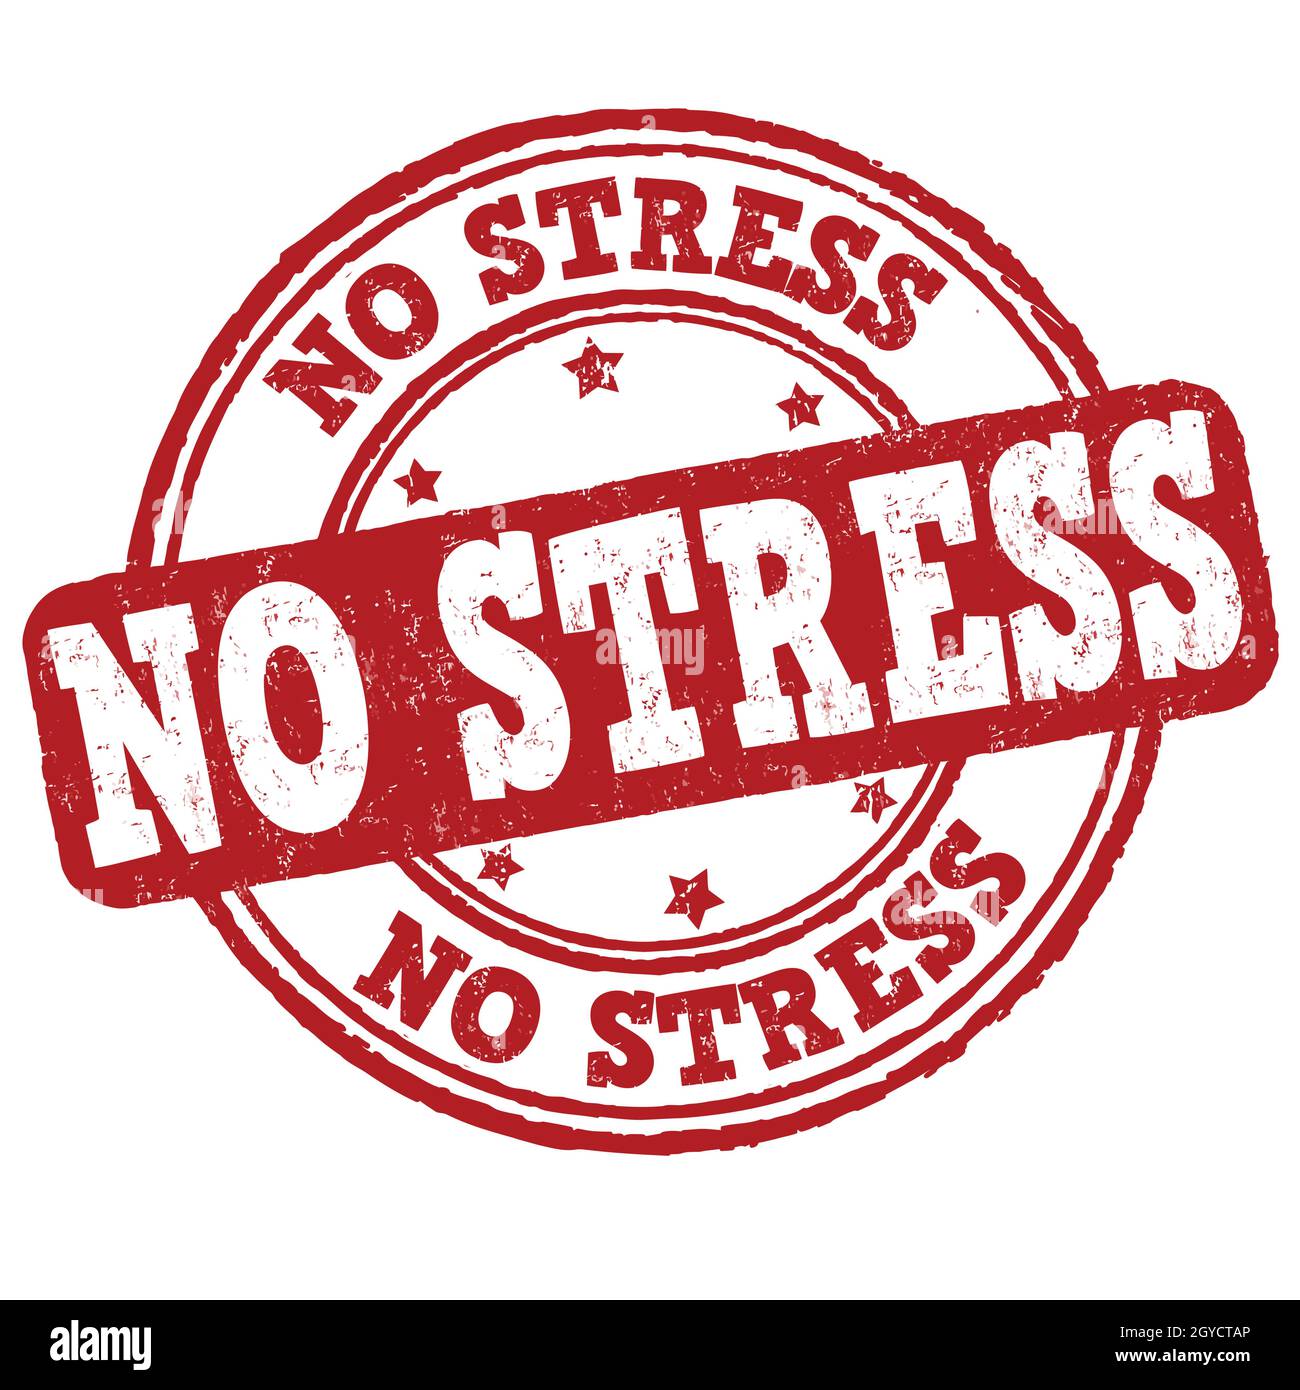 No stress grunge rubber stamp on white background, vector